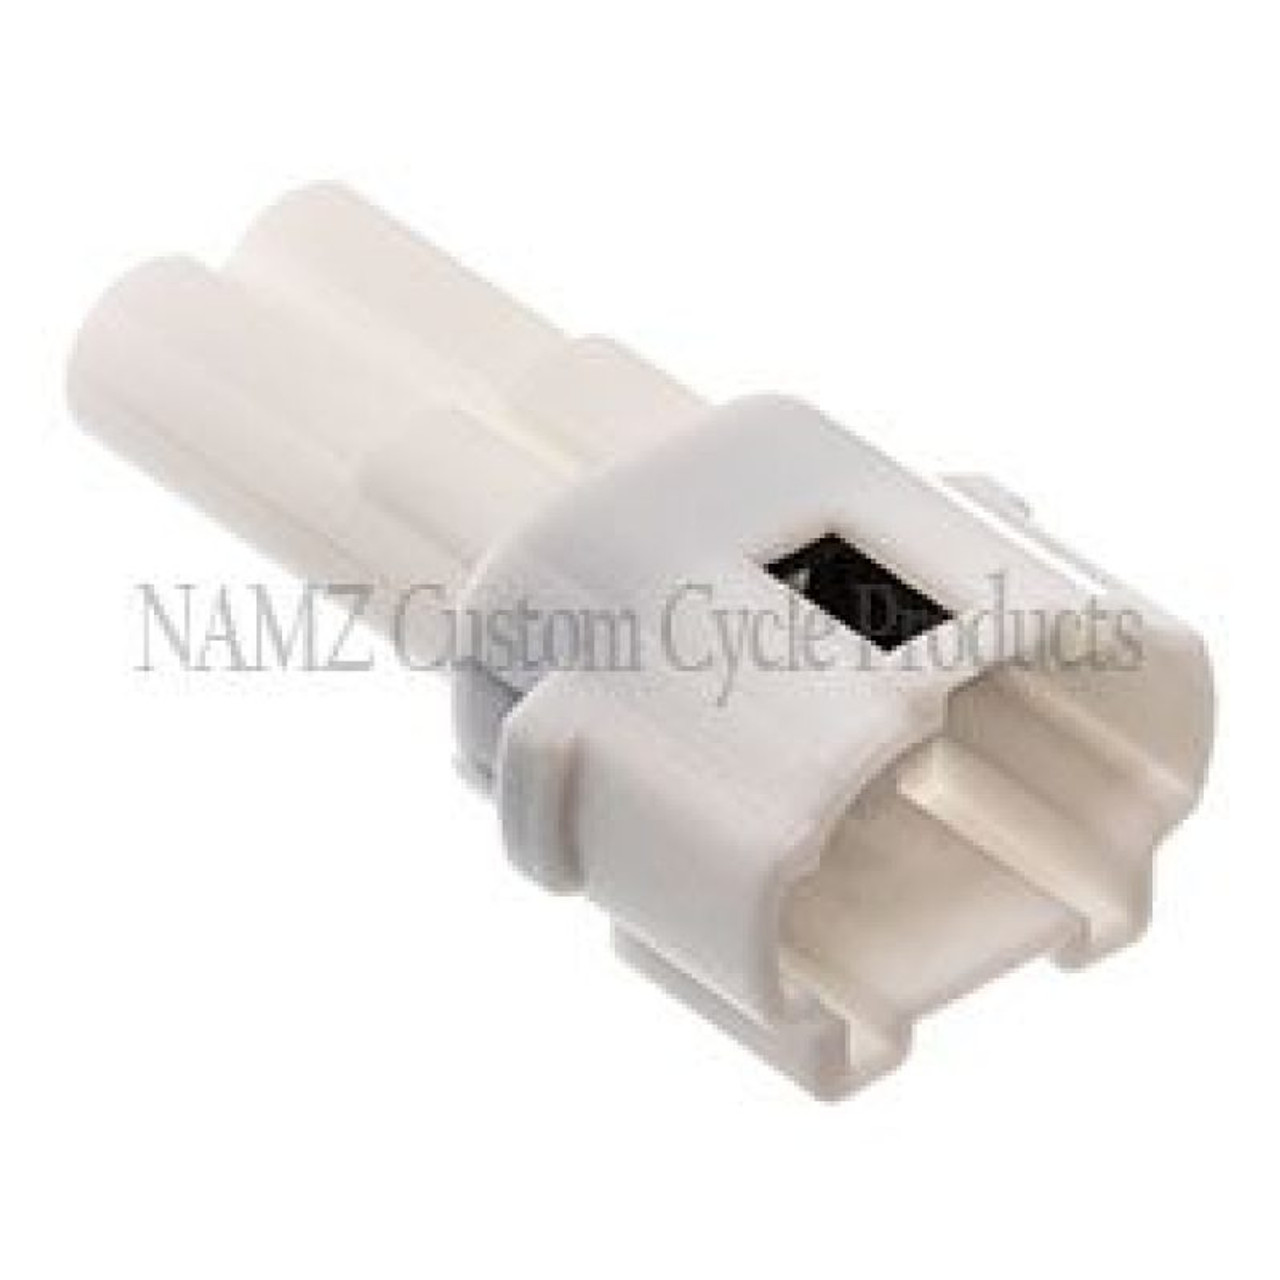 NAMZ MT Sealed Series 2-Position Male Connector (Single) - NS-6187-2311